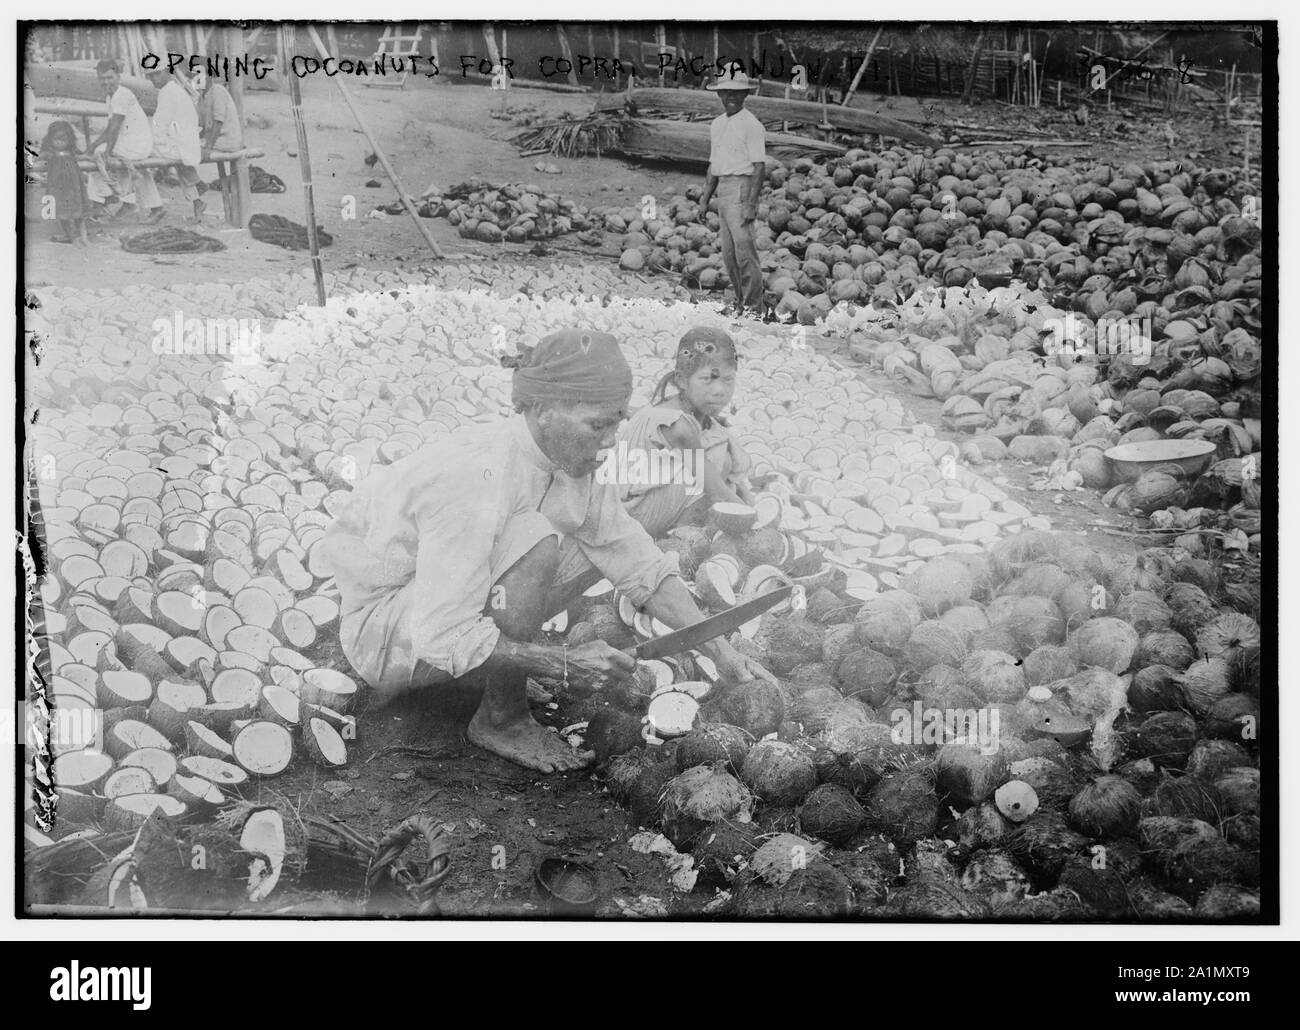 Opening Coconuts for Copra, Pagsanjan, P.I. Stock Photo